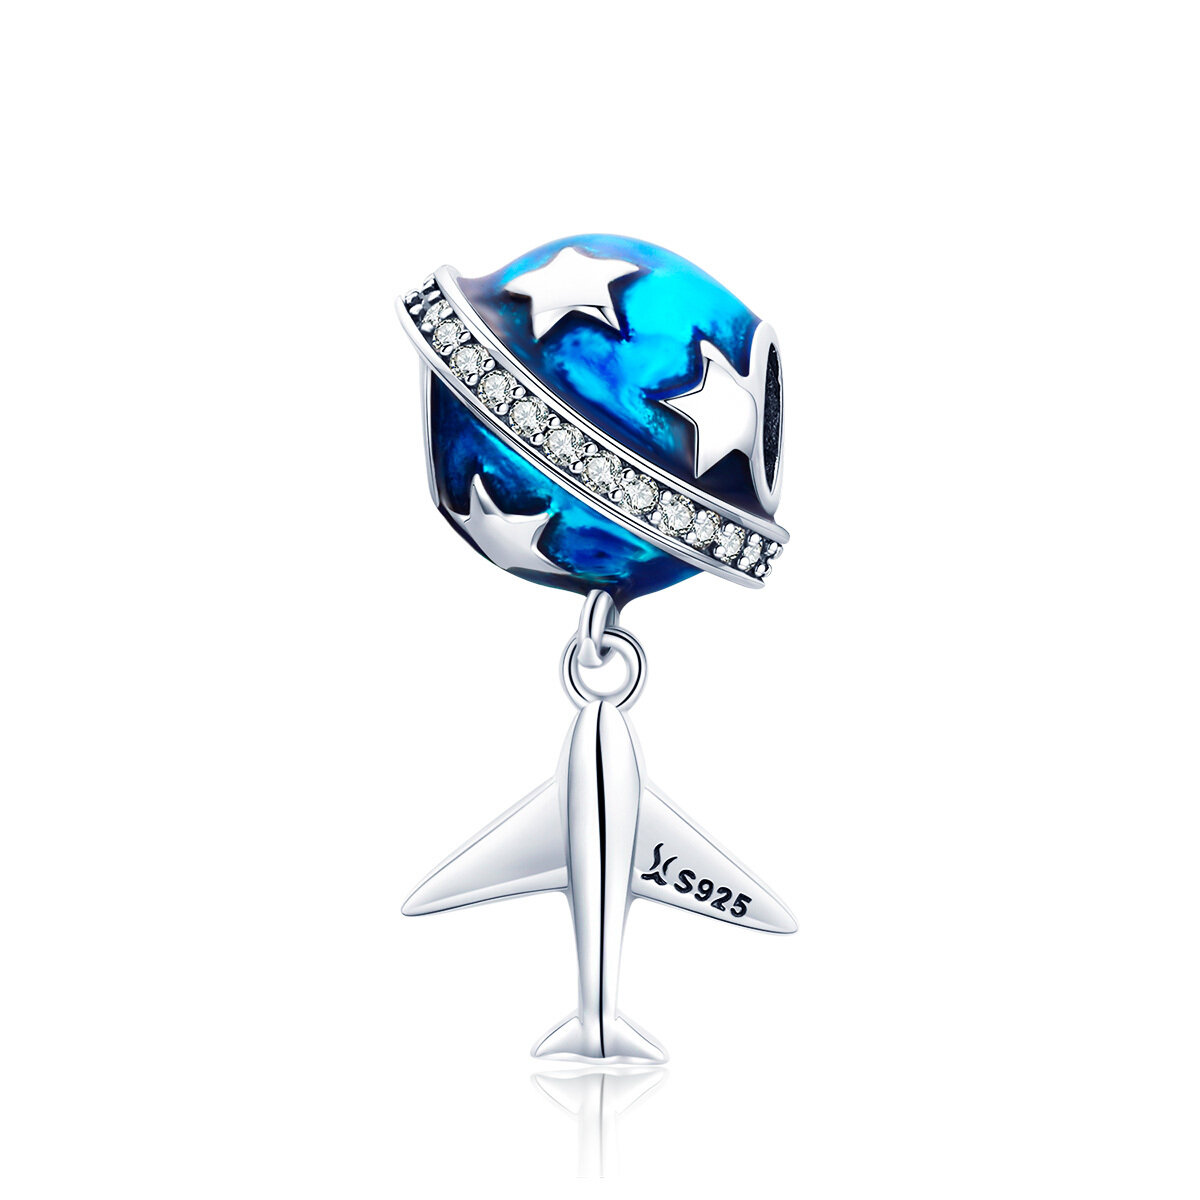 GemKing SCC887 The Dream of Traveling S925 Sterling Silver Charm